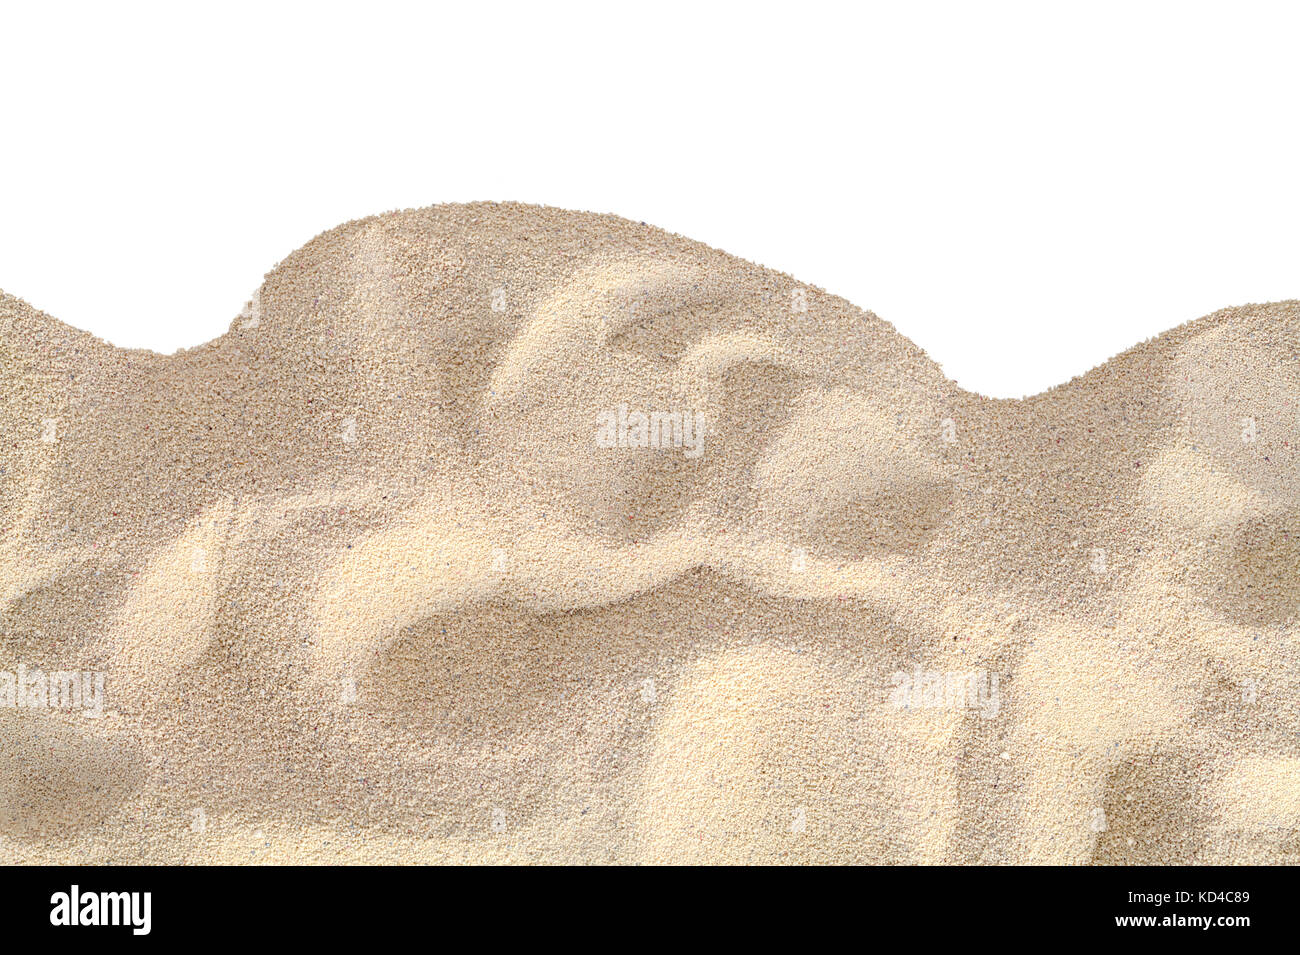 Beach Sand with Copy Space Cut Out on White. Stock Photo